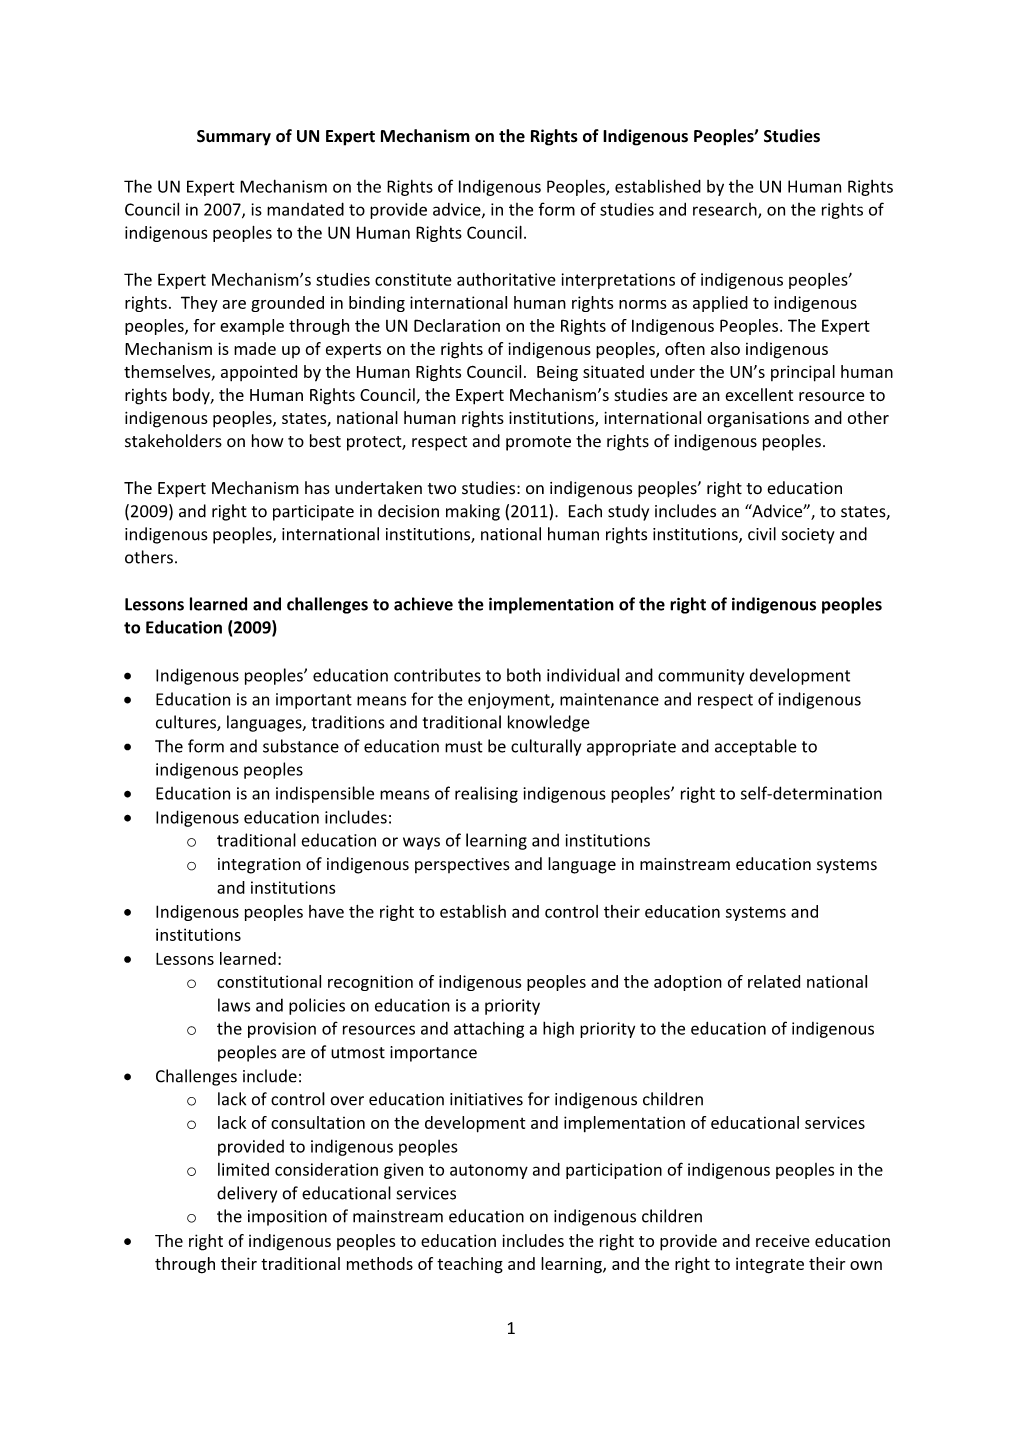 Summary of UN Expert Mechanism on the Rights of Indigenous Peoples Studies